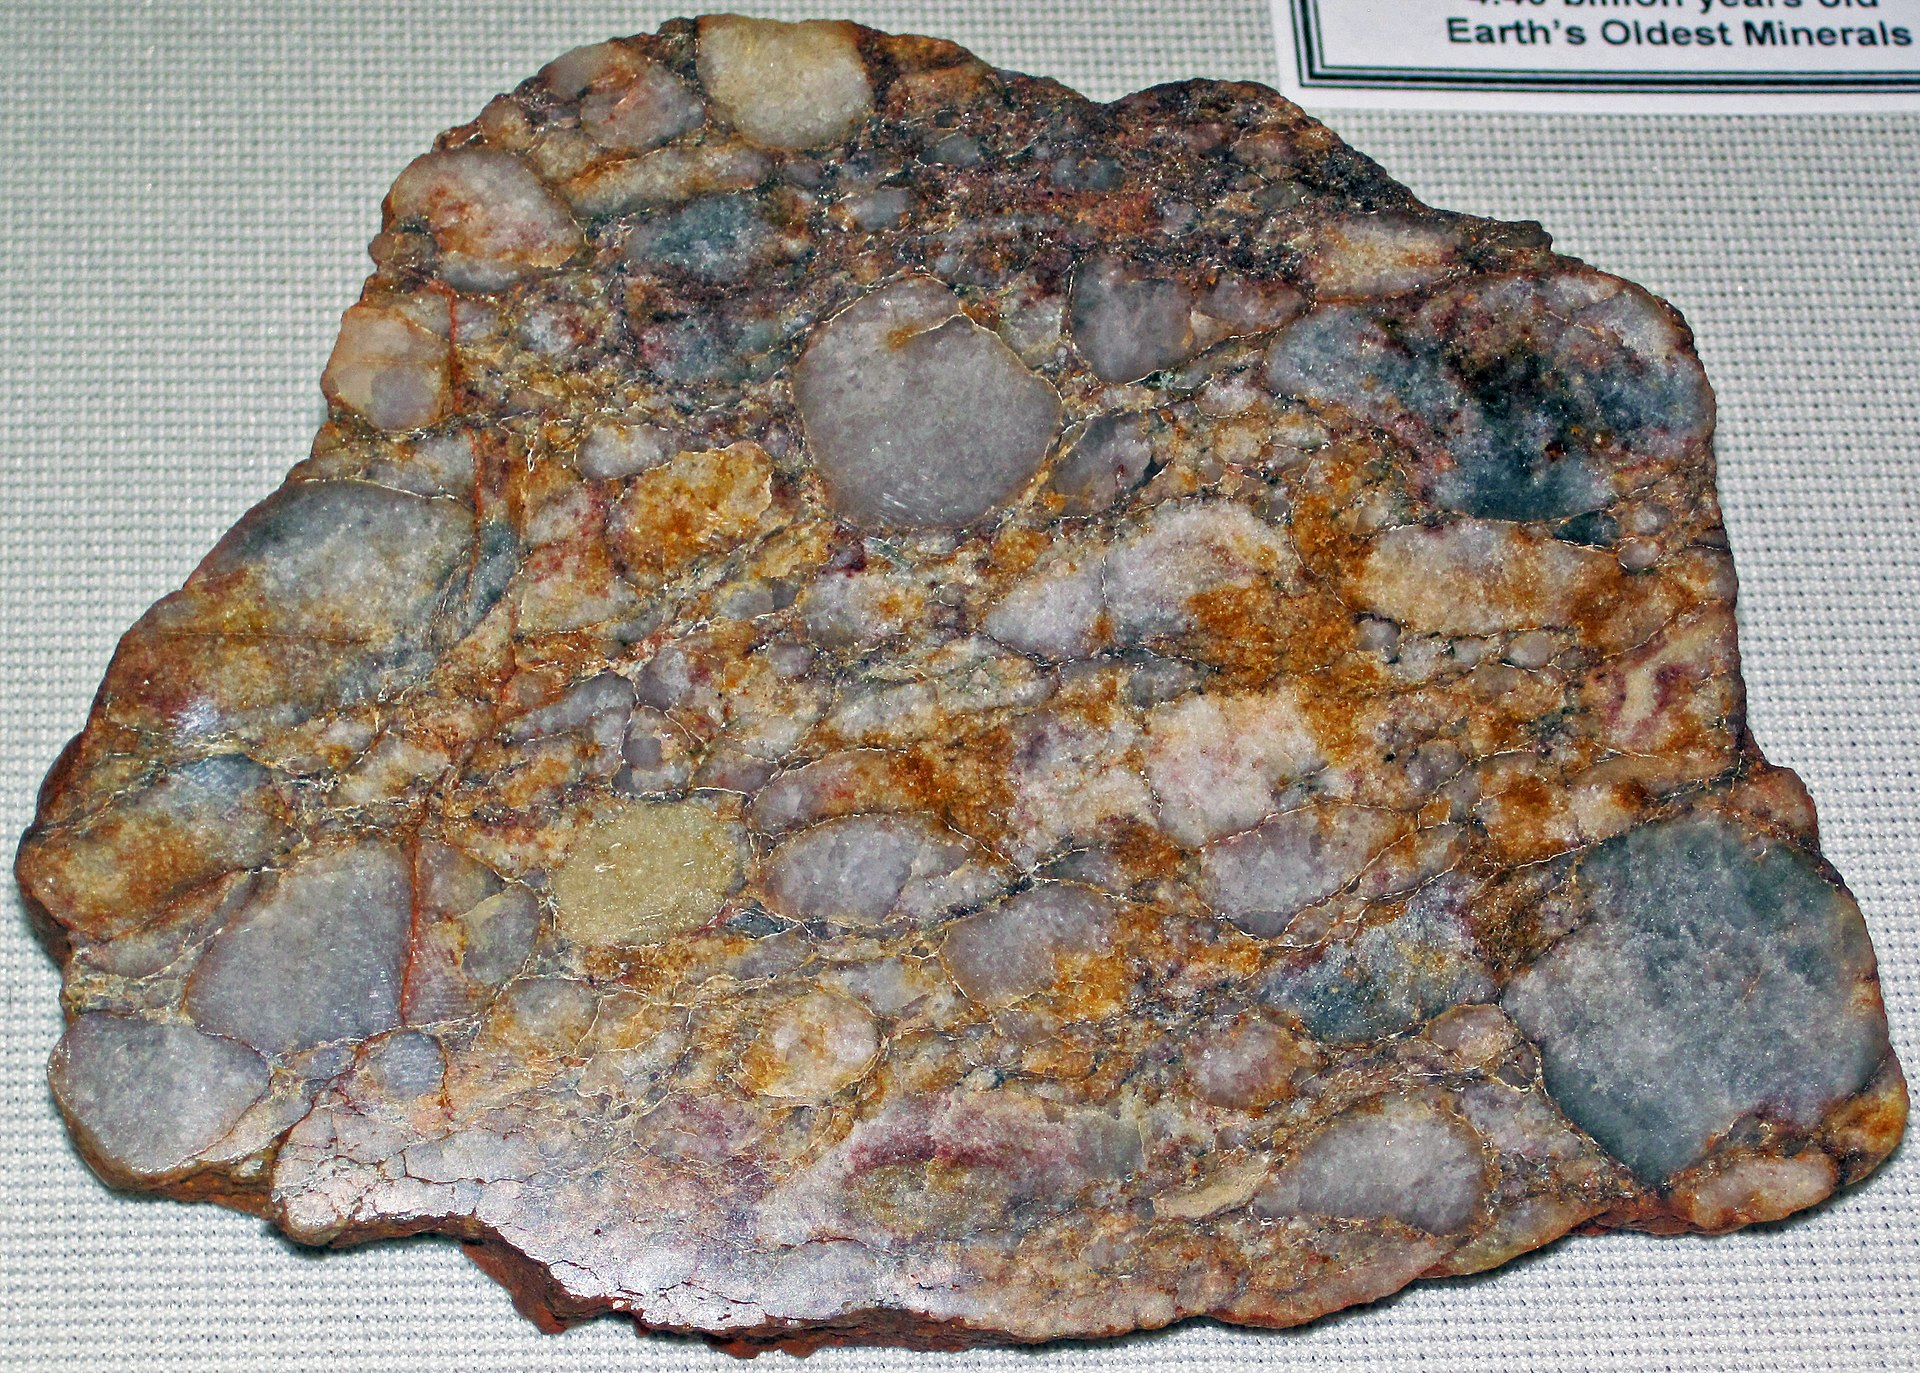 Quartz-pebble metaconglomerate (Jack Hills Quartzite), the rock type that contains the Earth's oldest dated mineral grains (detrital zircon). By: James St. John - Quartz-pebble metaconglomerate (Jack Hills Quartzite, Archean, 2.65 to 3.05 Ga; Jack Hills, Western Australia) CC BY 2.0